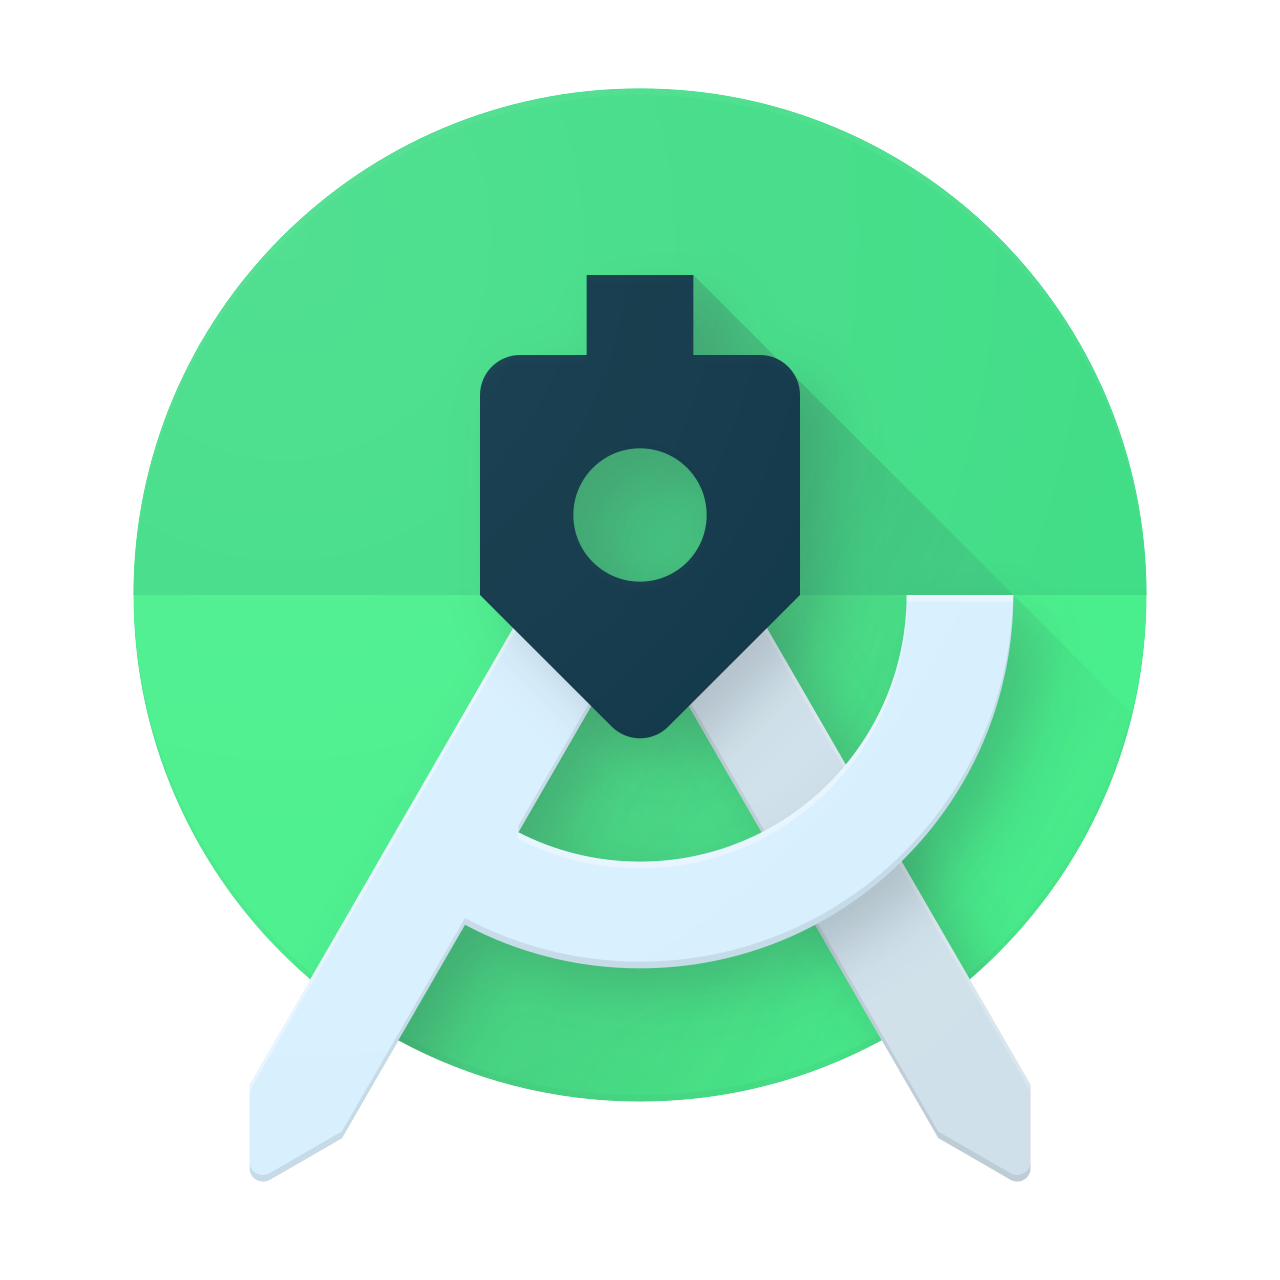 Android Studio | Development supported by Galliot